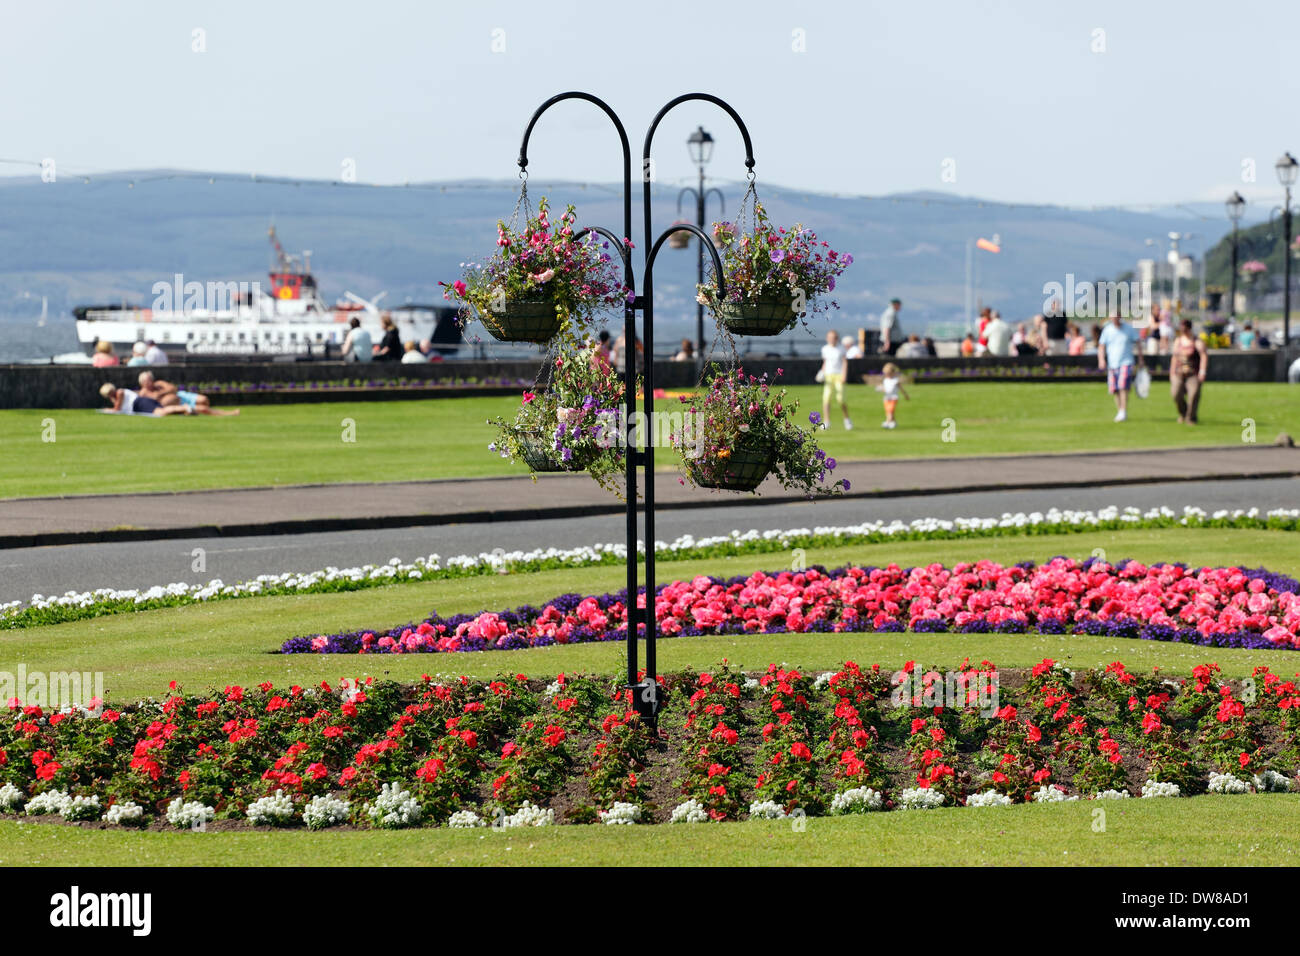 Summer hanging baskets and floral display in the seaside town of Largs in North Ayrshire, Scotland, UK Stock Photo